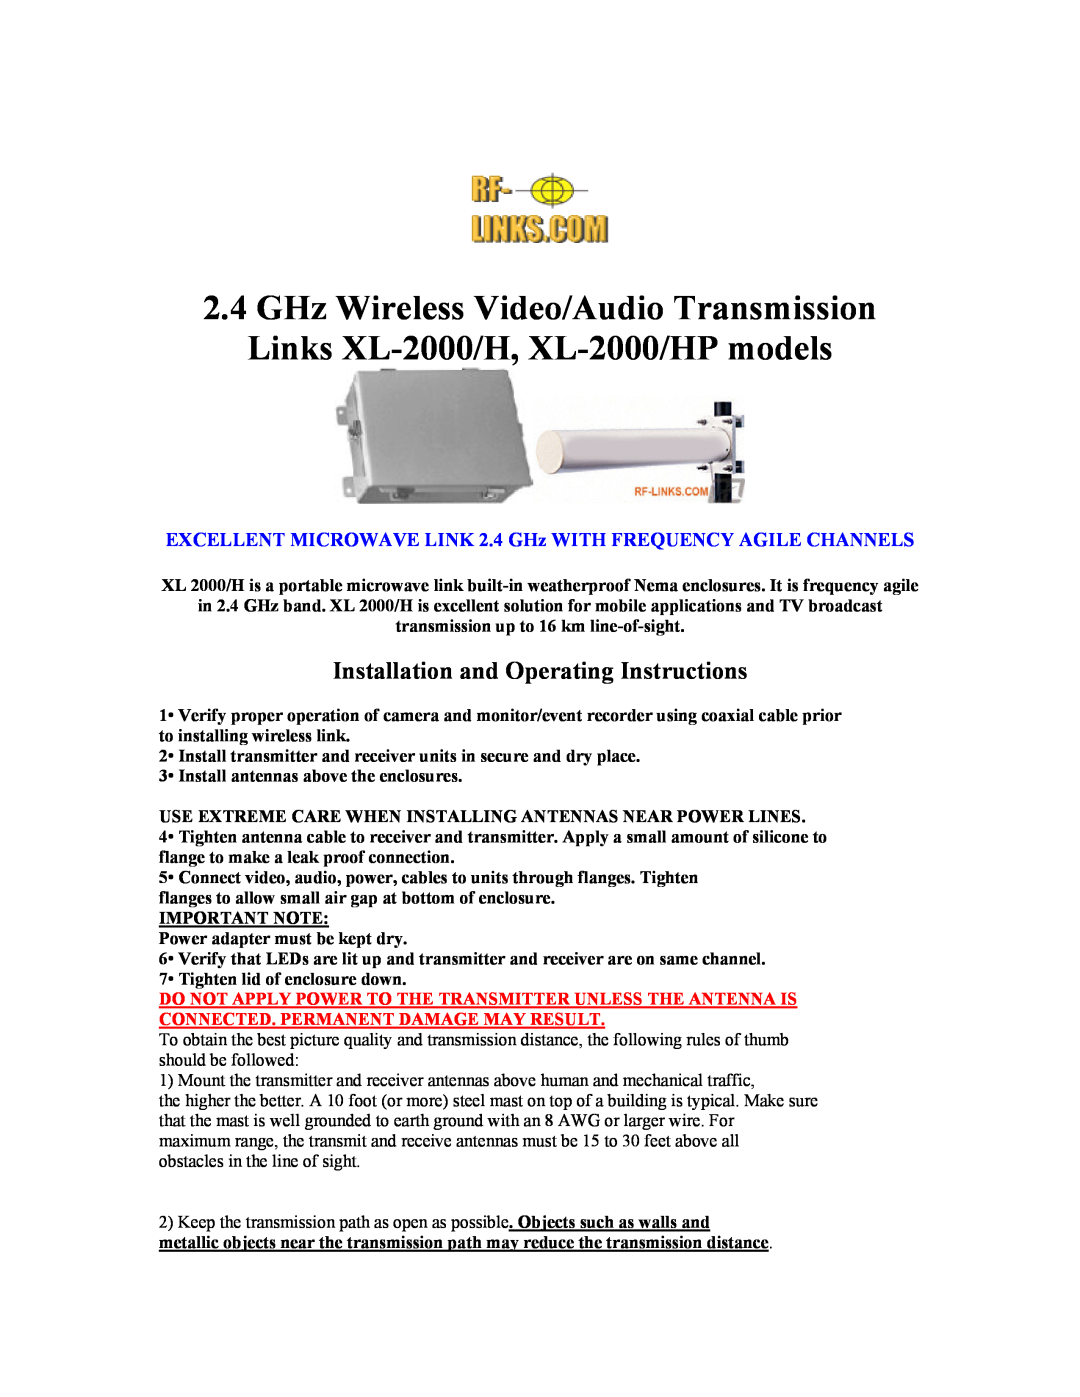 RF-Link Technology XL-2000/H operating instructions Installation and Operating Instructions 